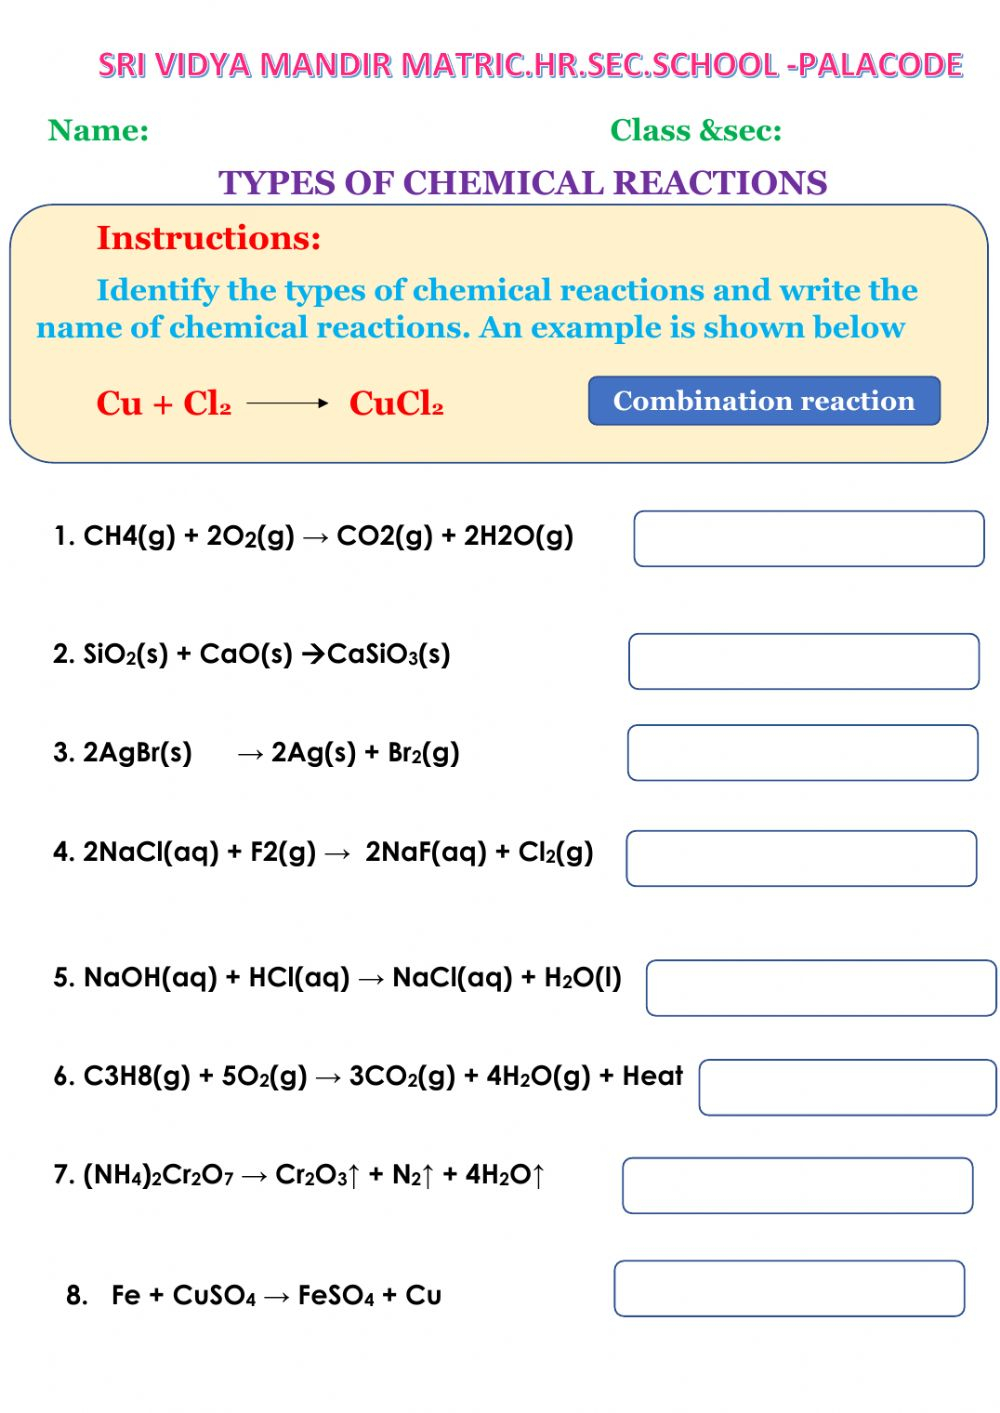 identify-types-of-chemical-reactions-saferbrowser-yahoo-image-search